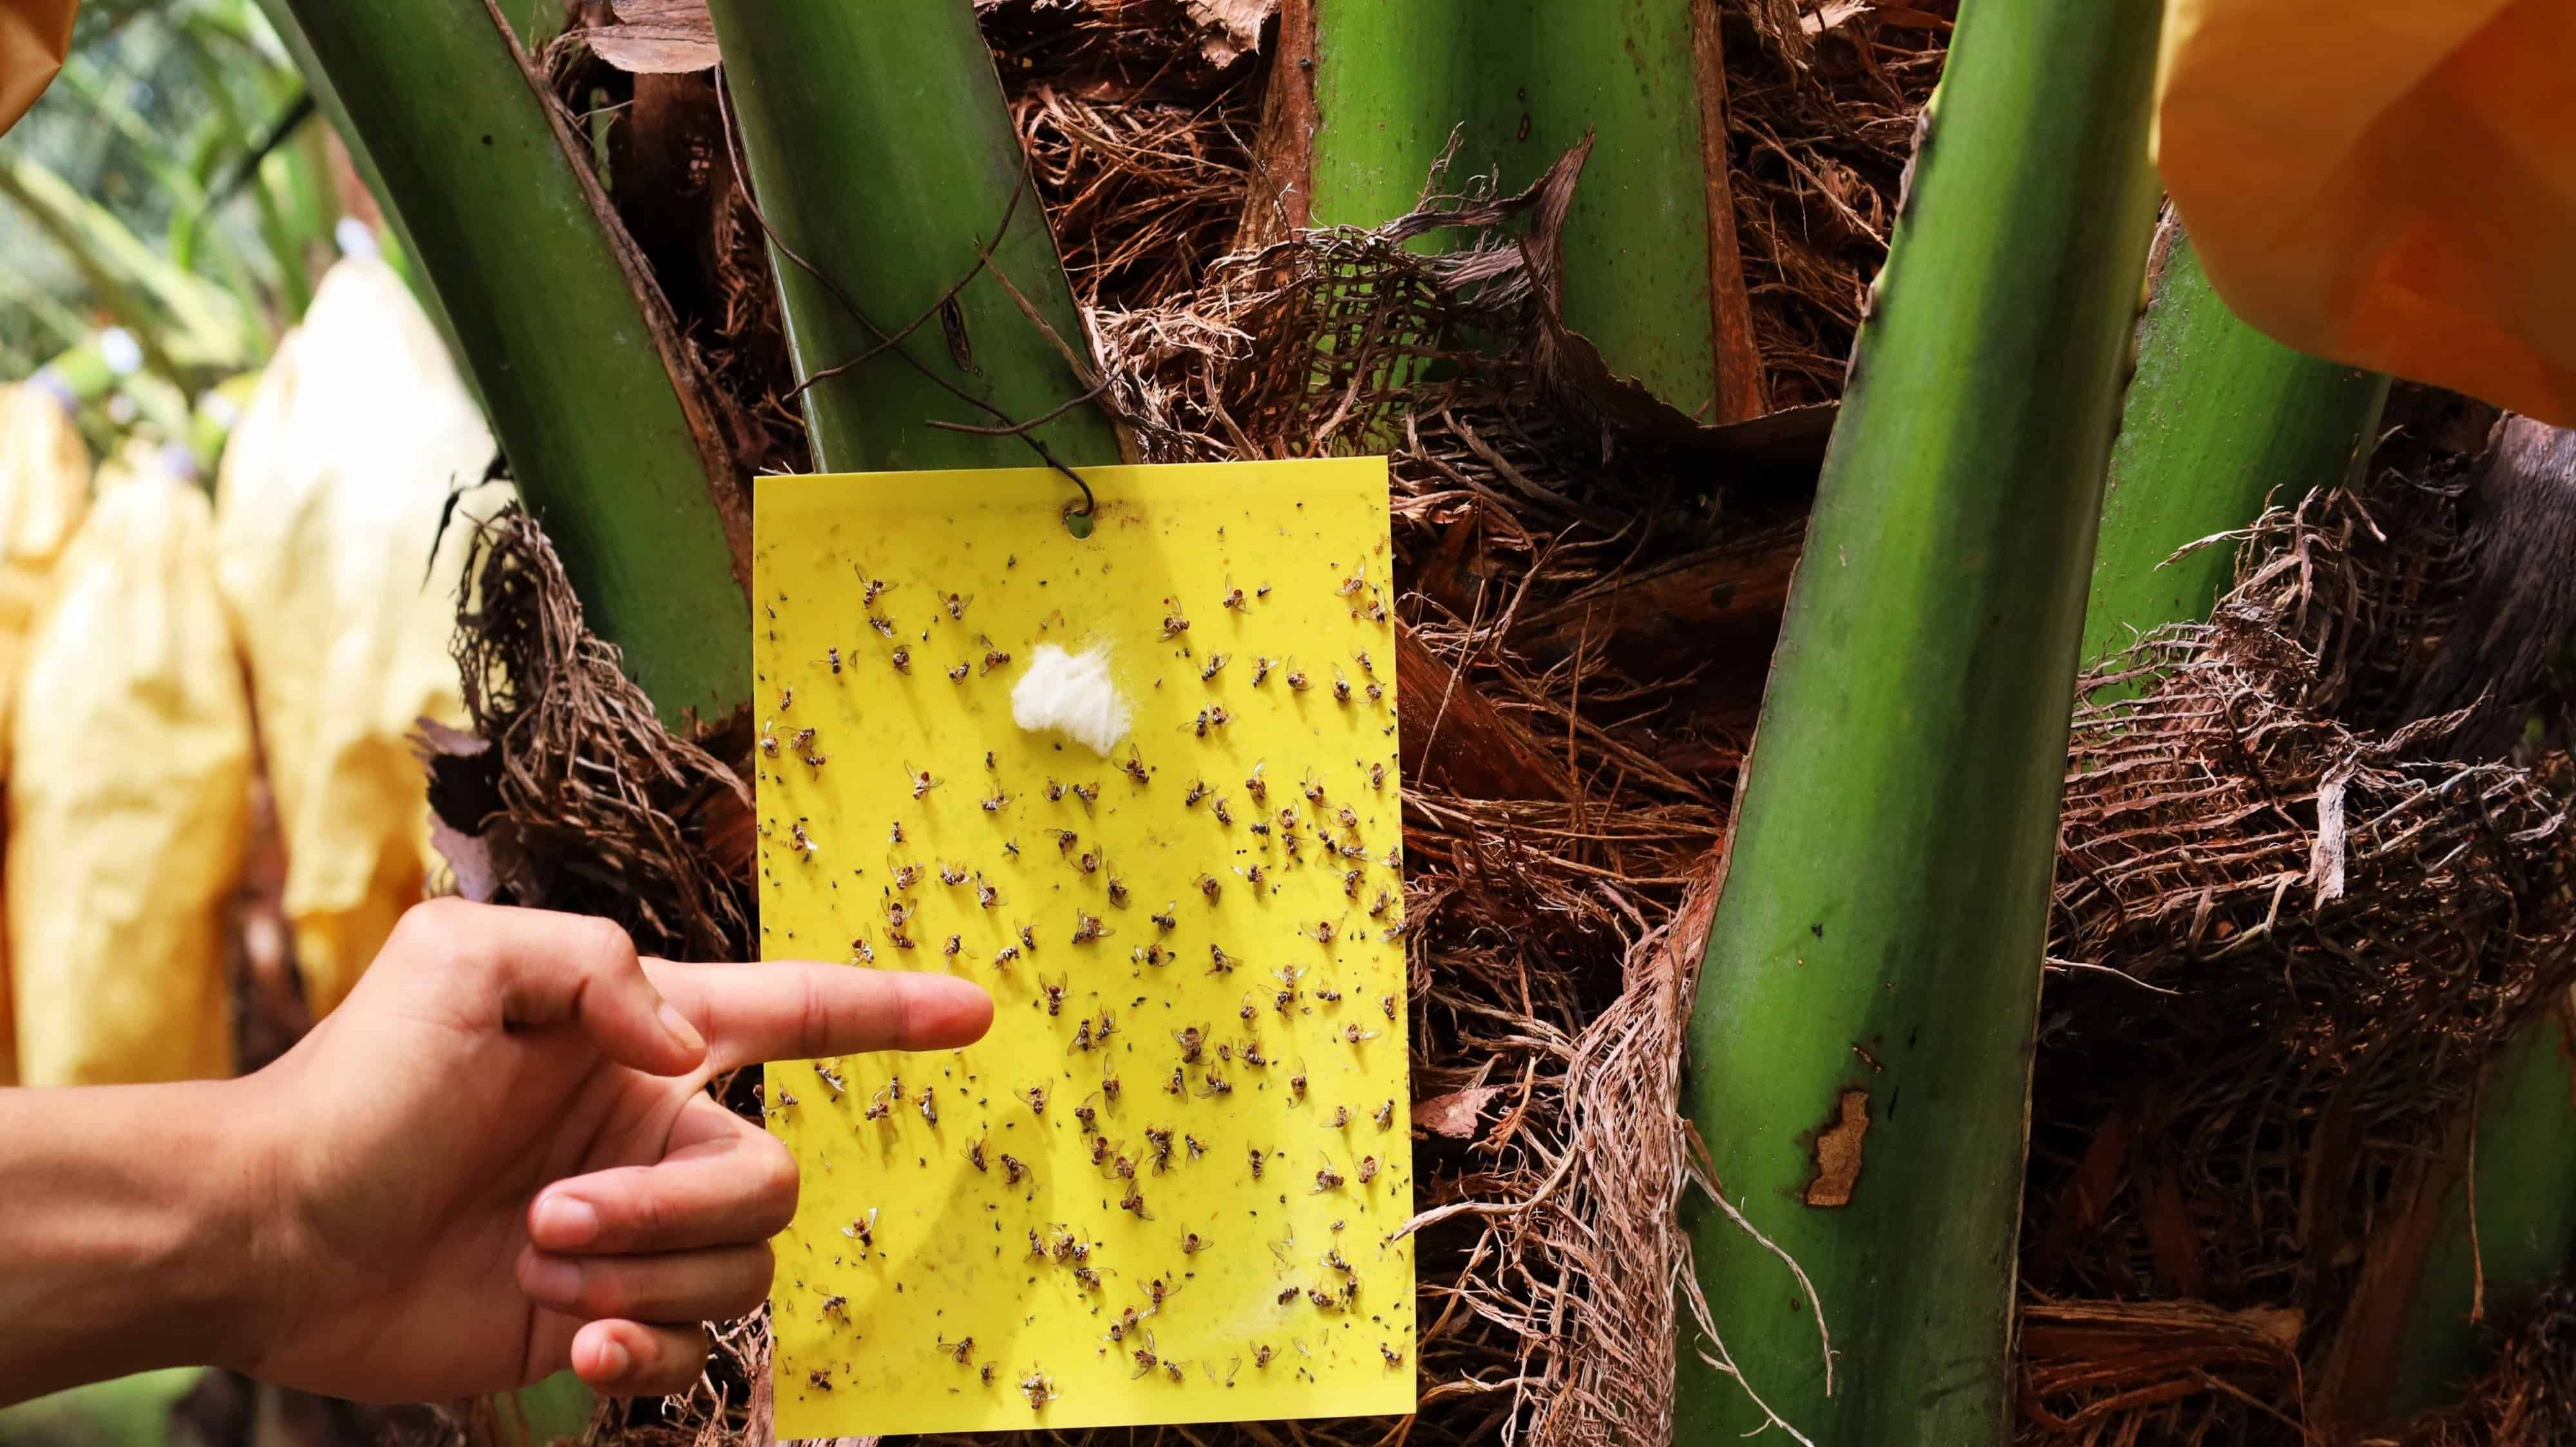 Close-up of garden glue traps. The fingers of the yellow sticky card trap hang on the palm trees to control insects and pests in organic farms. Selective focus